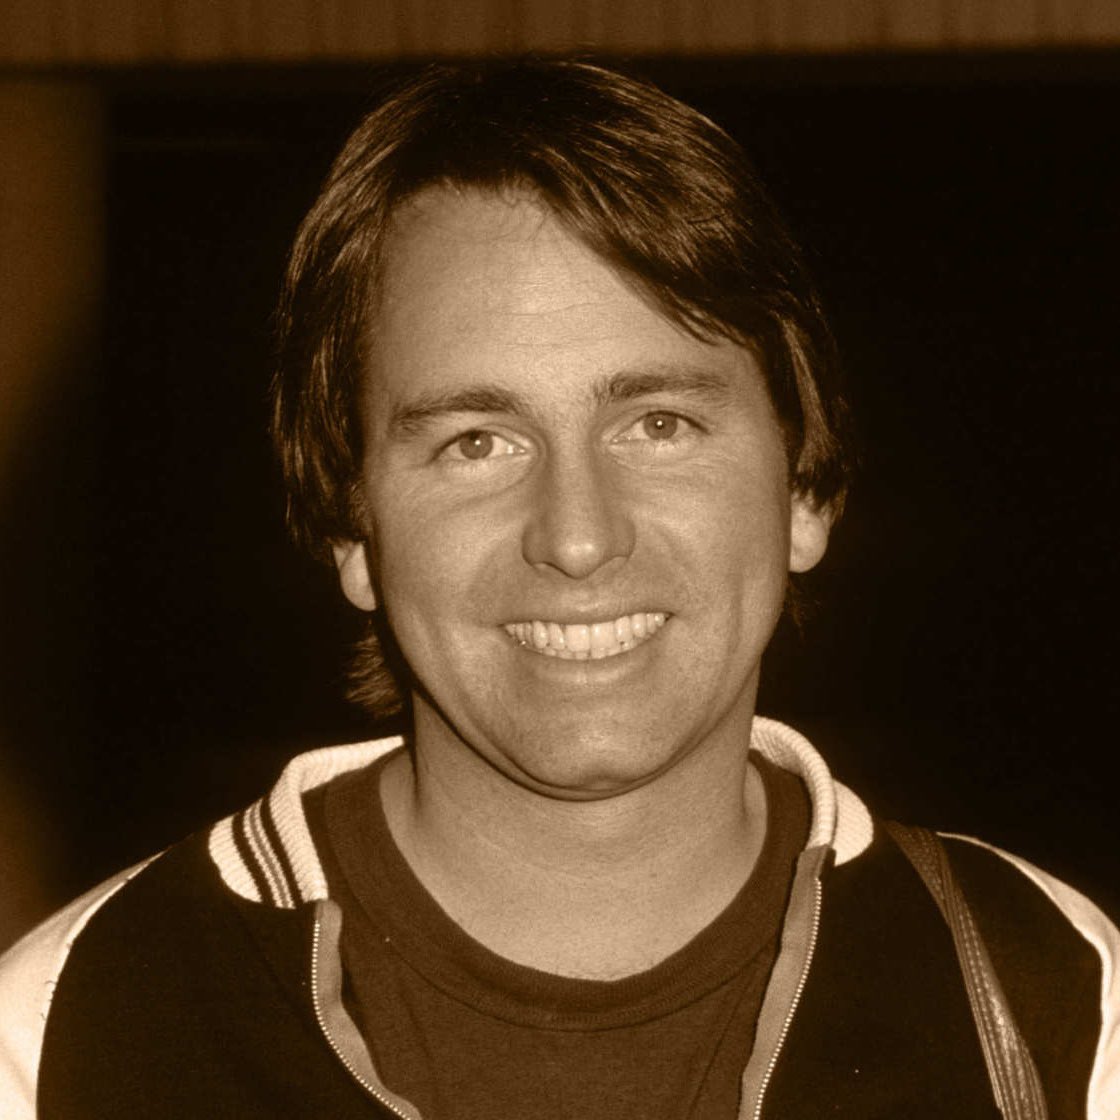 Dear kids, his name was John Ritter and he was awesome.